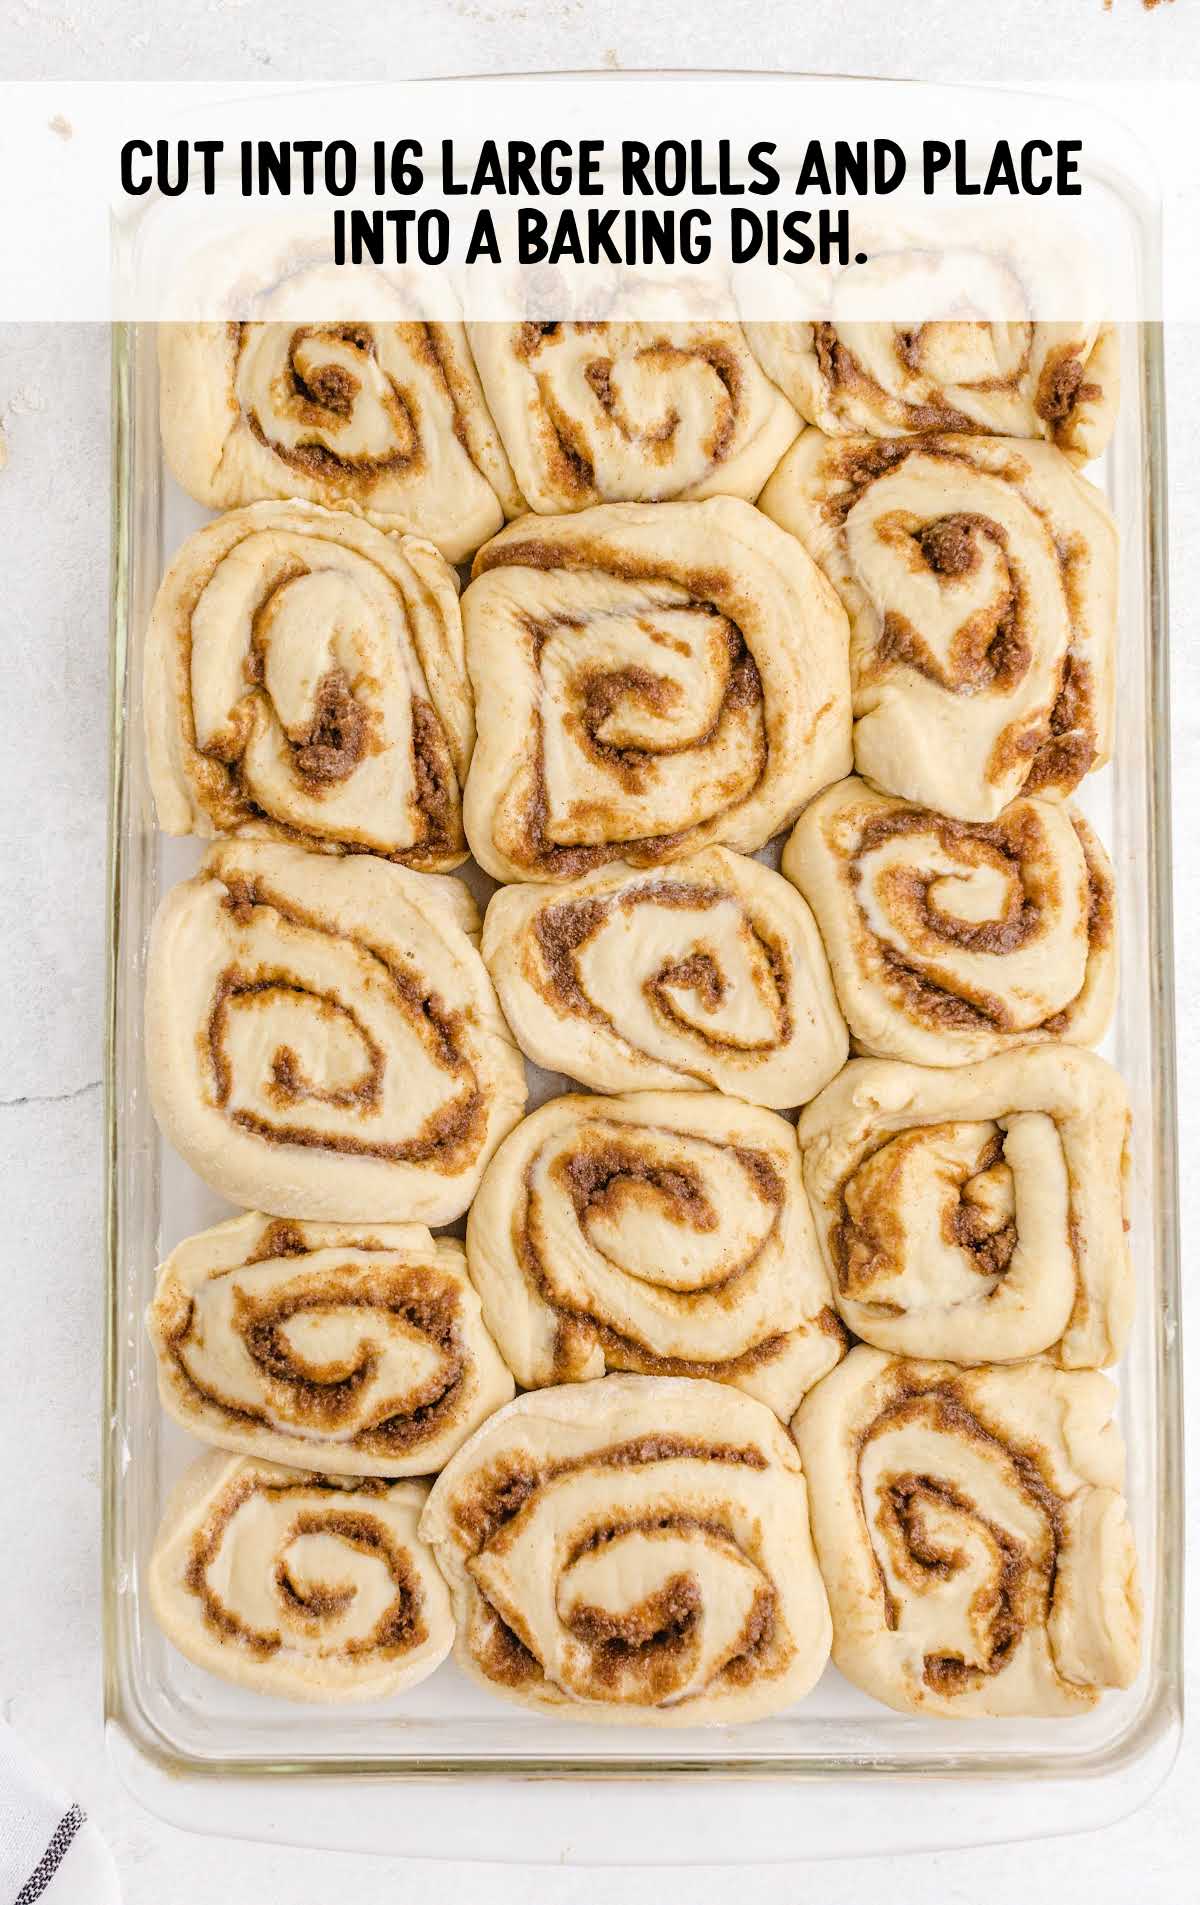 Cinnabon Cinnamon Rolls process shot of large rolls cut and and placed into a baking dish